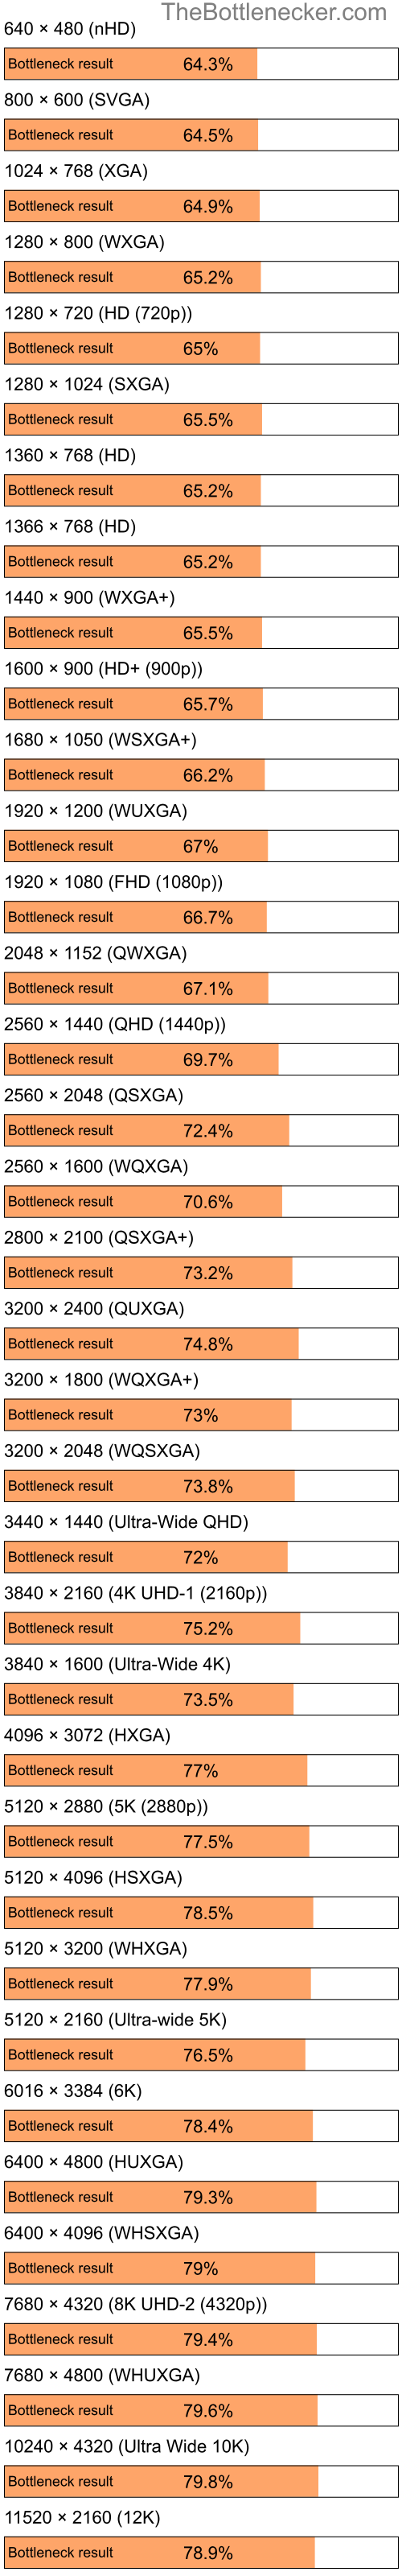 Bottleneck results by resolution for Intel Pentium 4 and AMD Radeon X800 XL in General Tasks